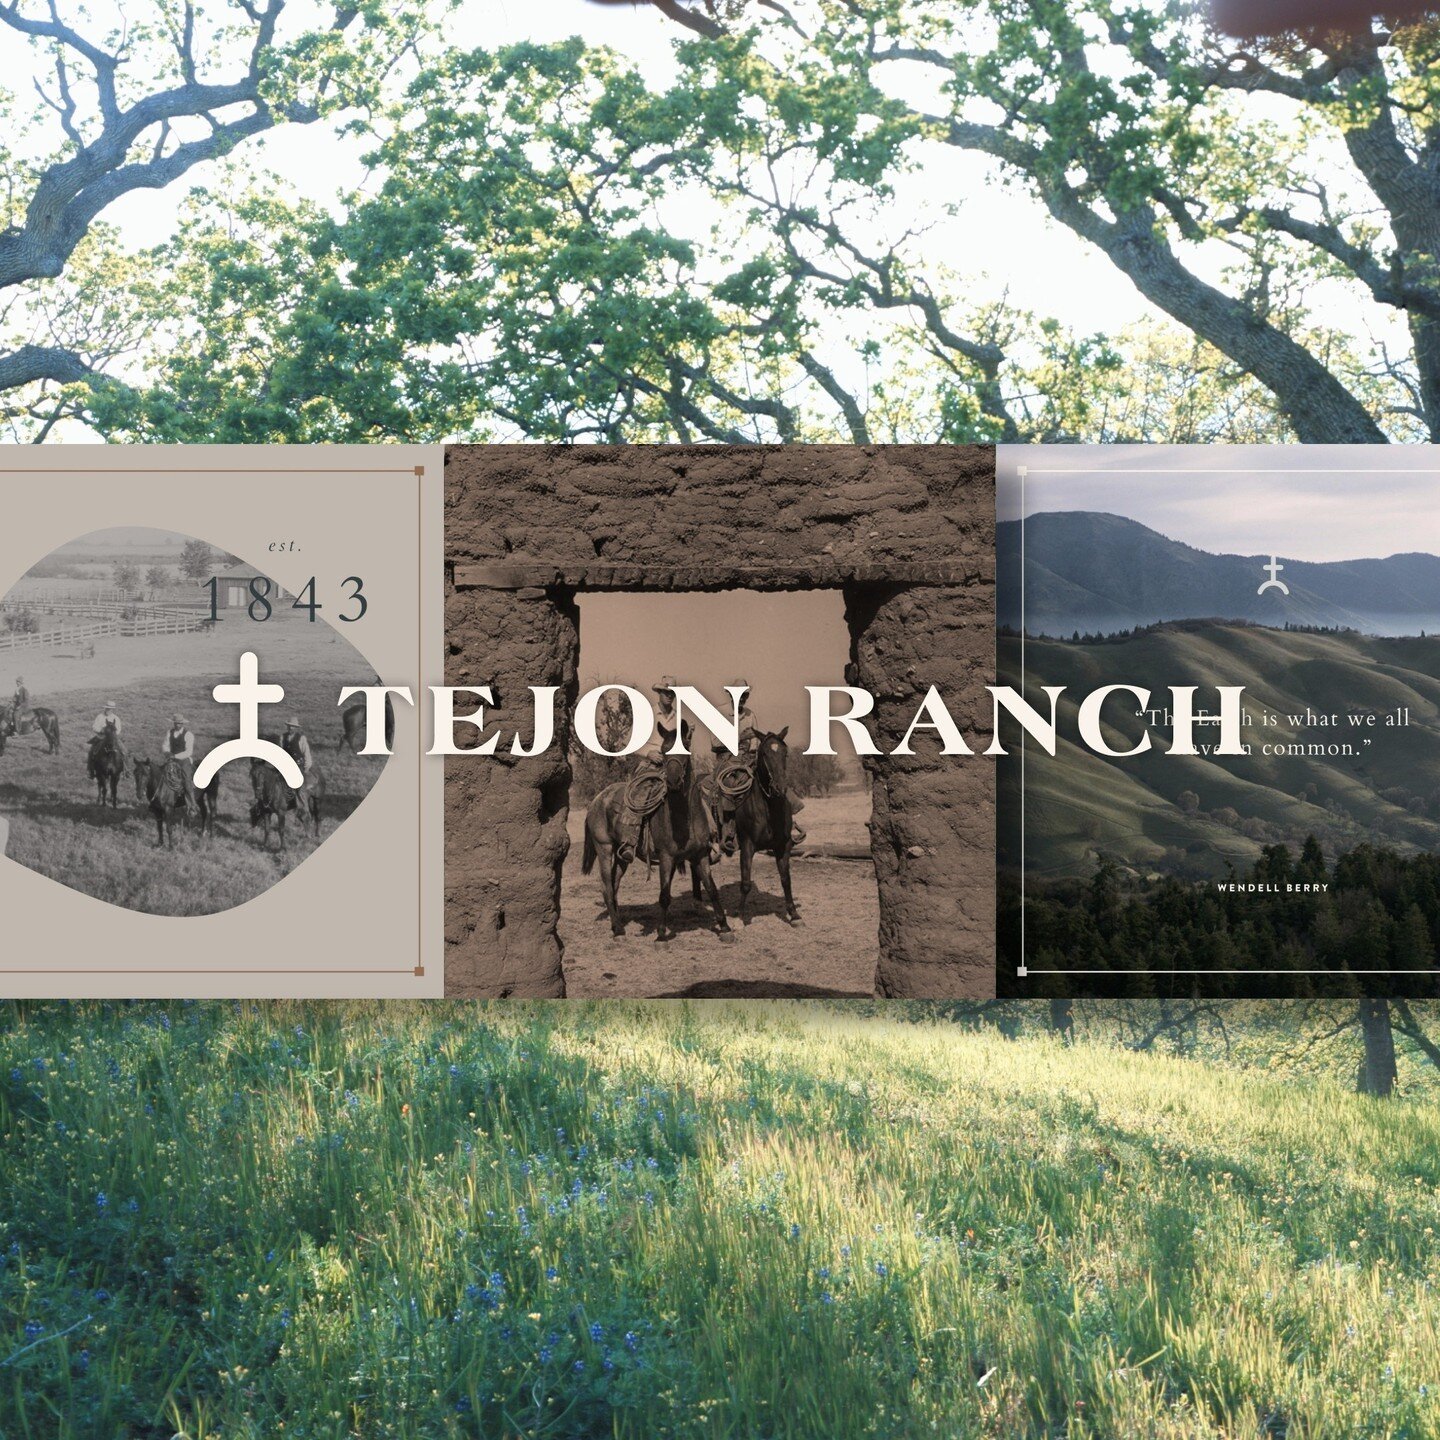 Working with Tejon Ranch to develop their social strategy and design direction over the past few months has been an amazing opportunity. We've been learning so much about the history of our region and the longstanding importance of Tejon Ranch in not